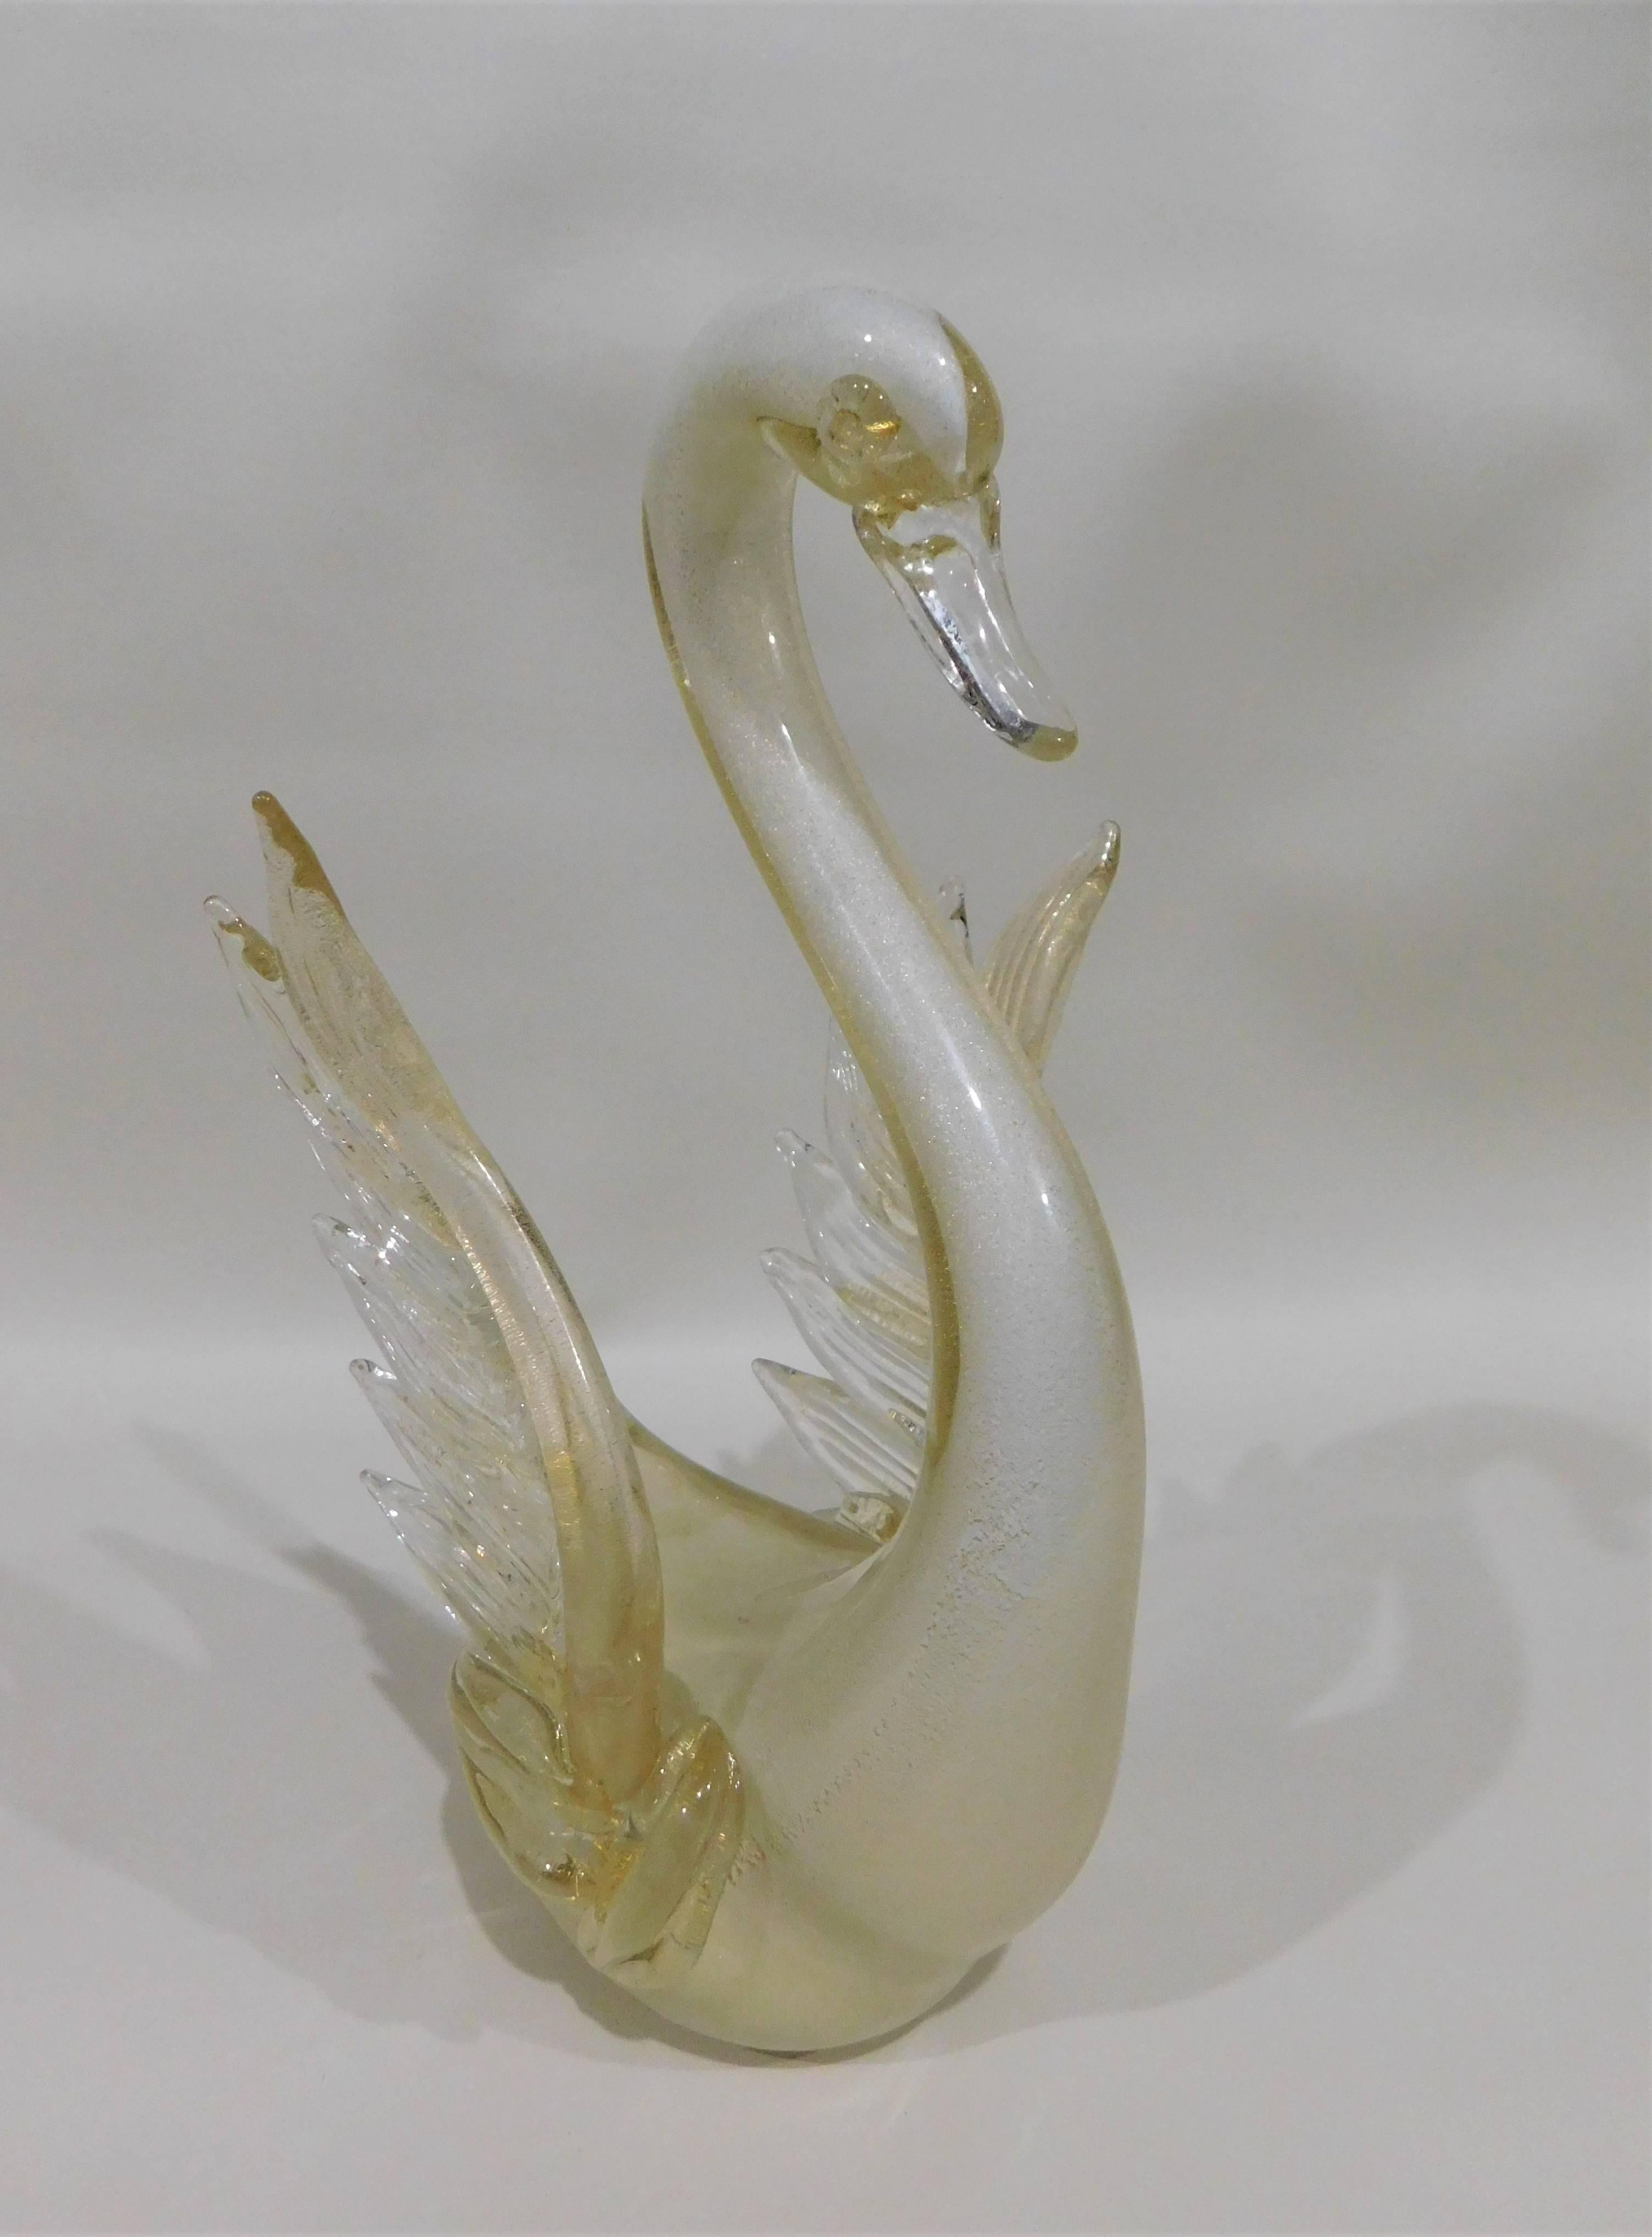 Pair of Decorative Murano Italian Art Glass Swans with Gold Flecks For Sale 1